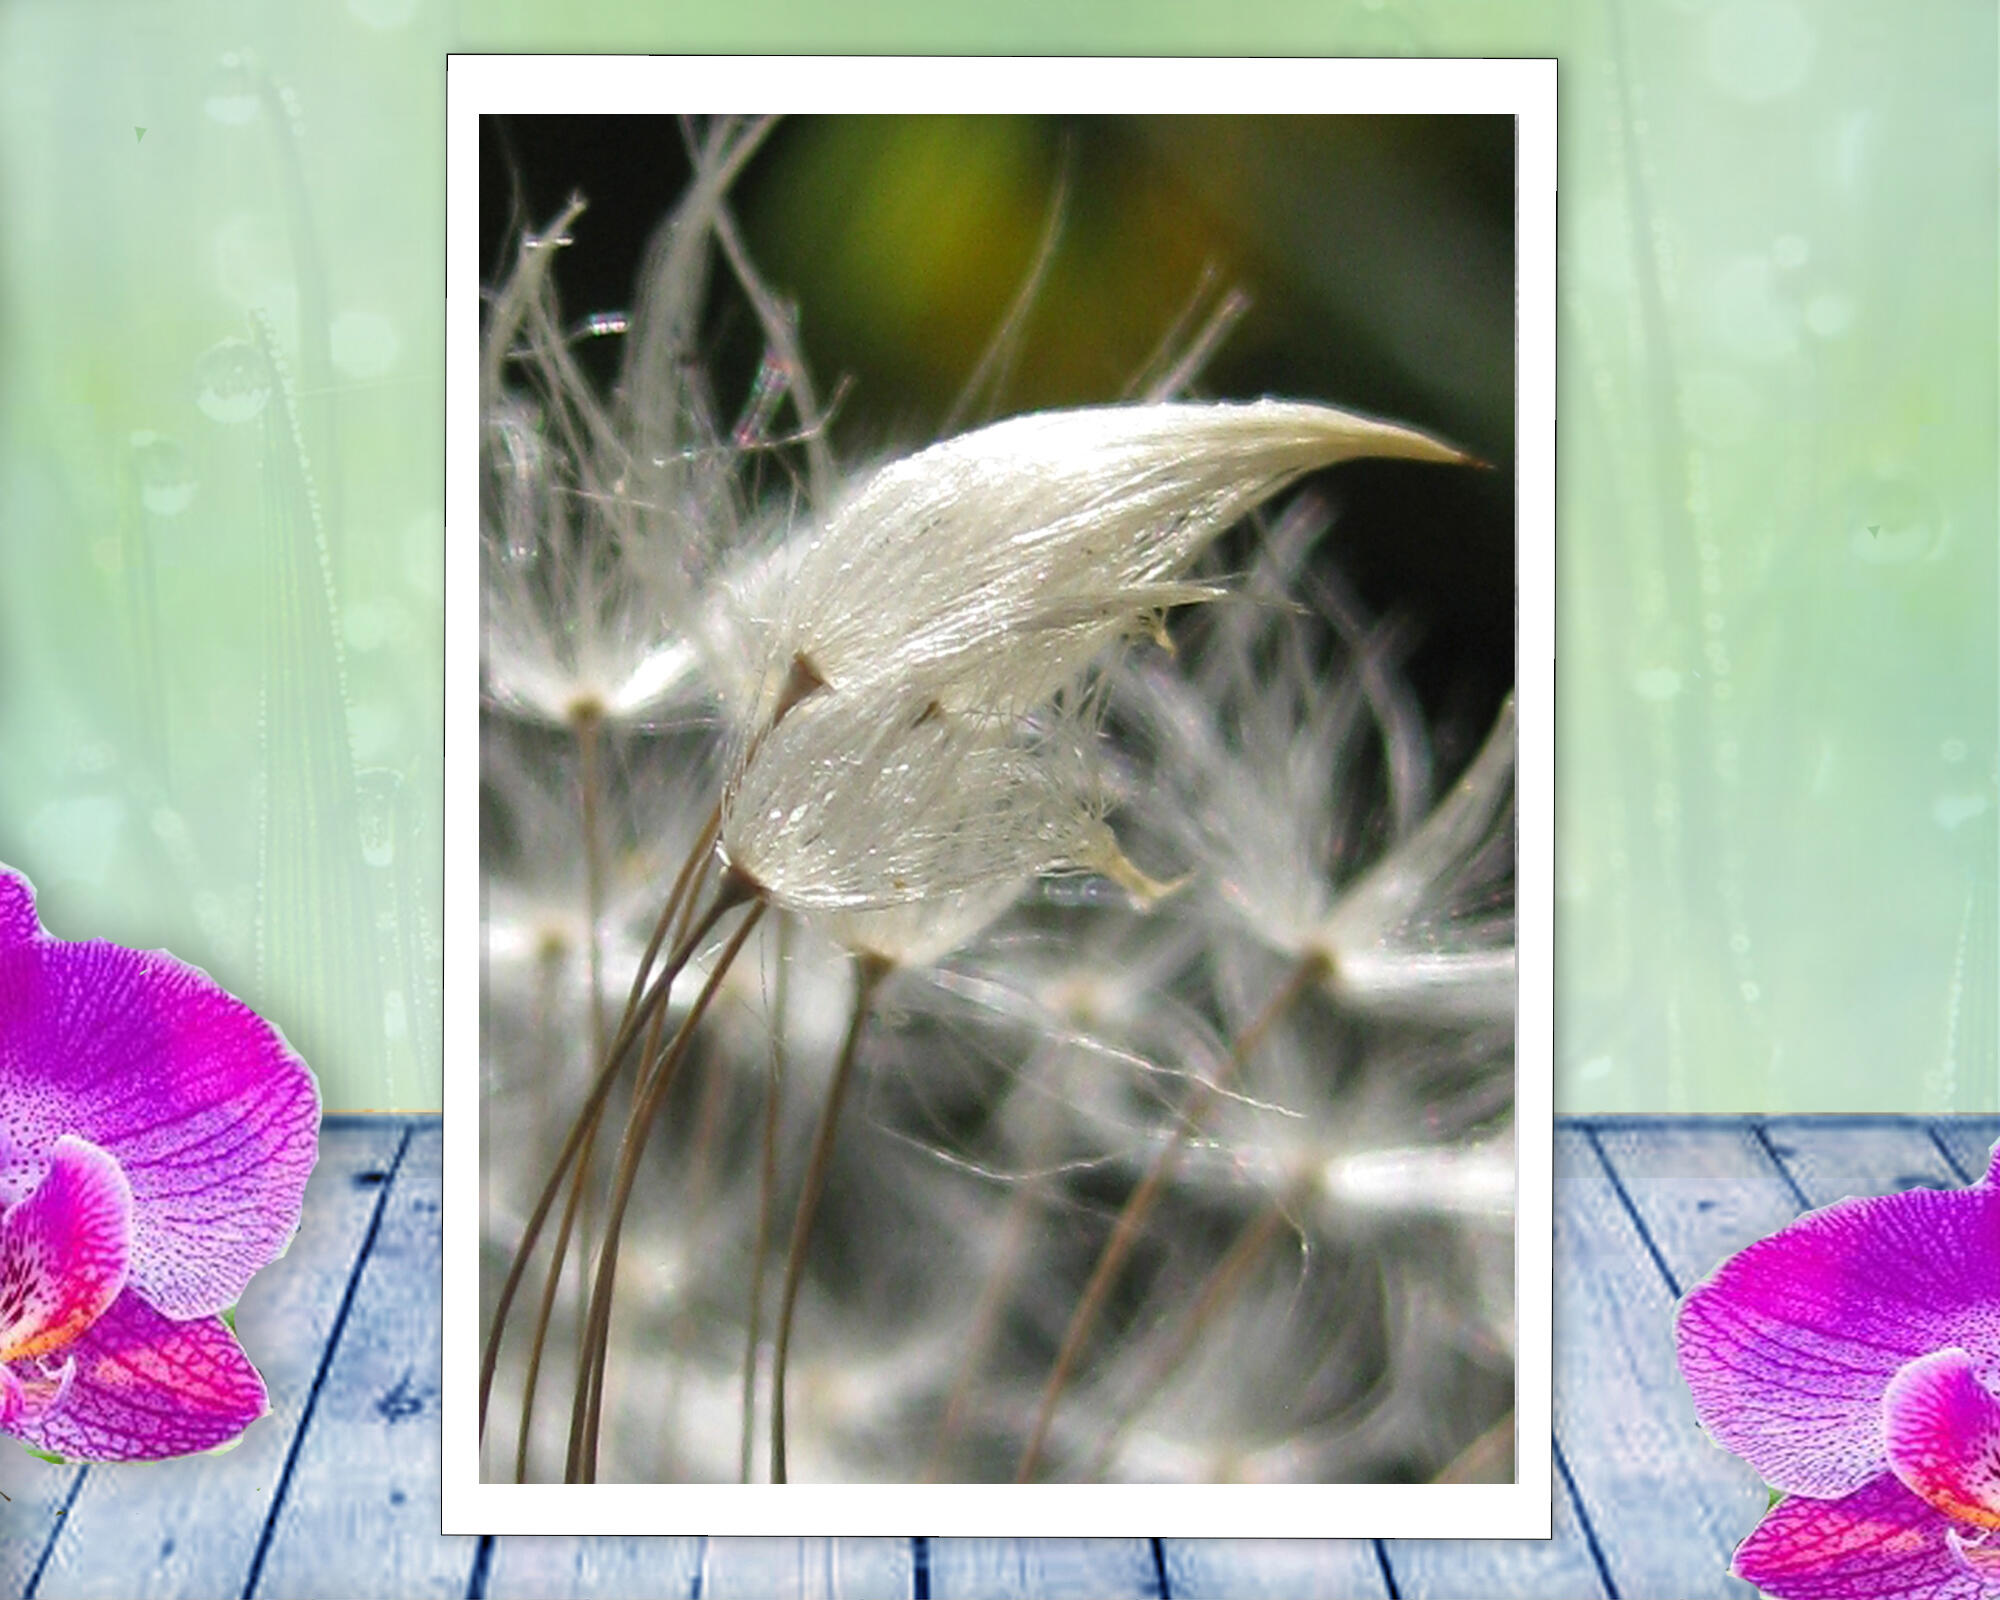 Dandelion seeds appear to embrace in this sexy, sensual, nature macro photo. Print with Poem by The Poetry of Nature